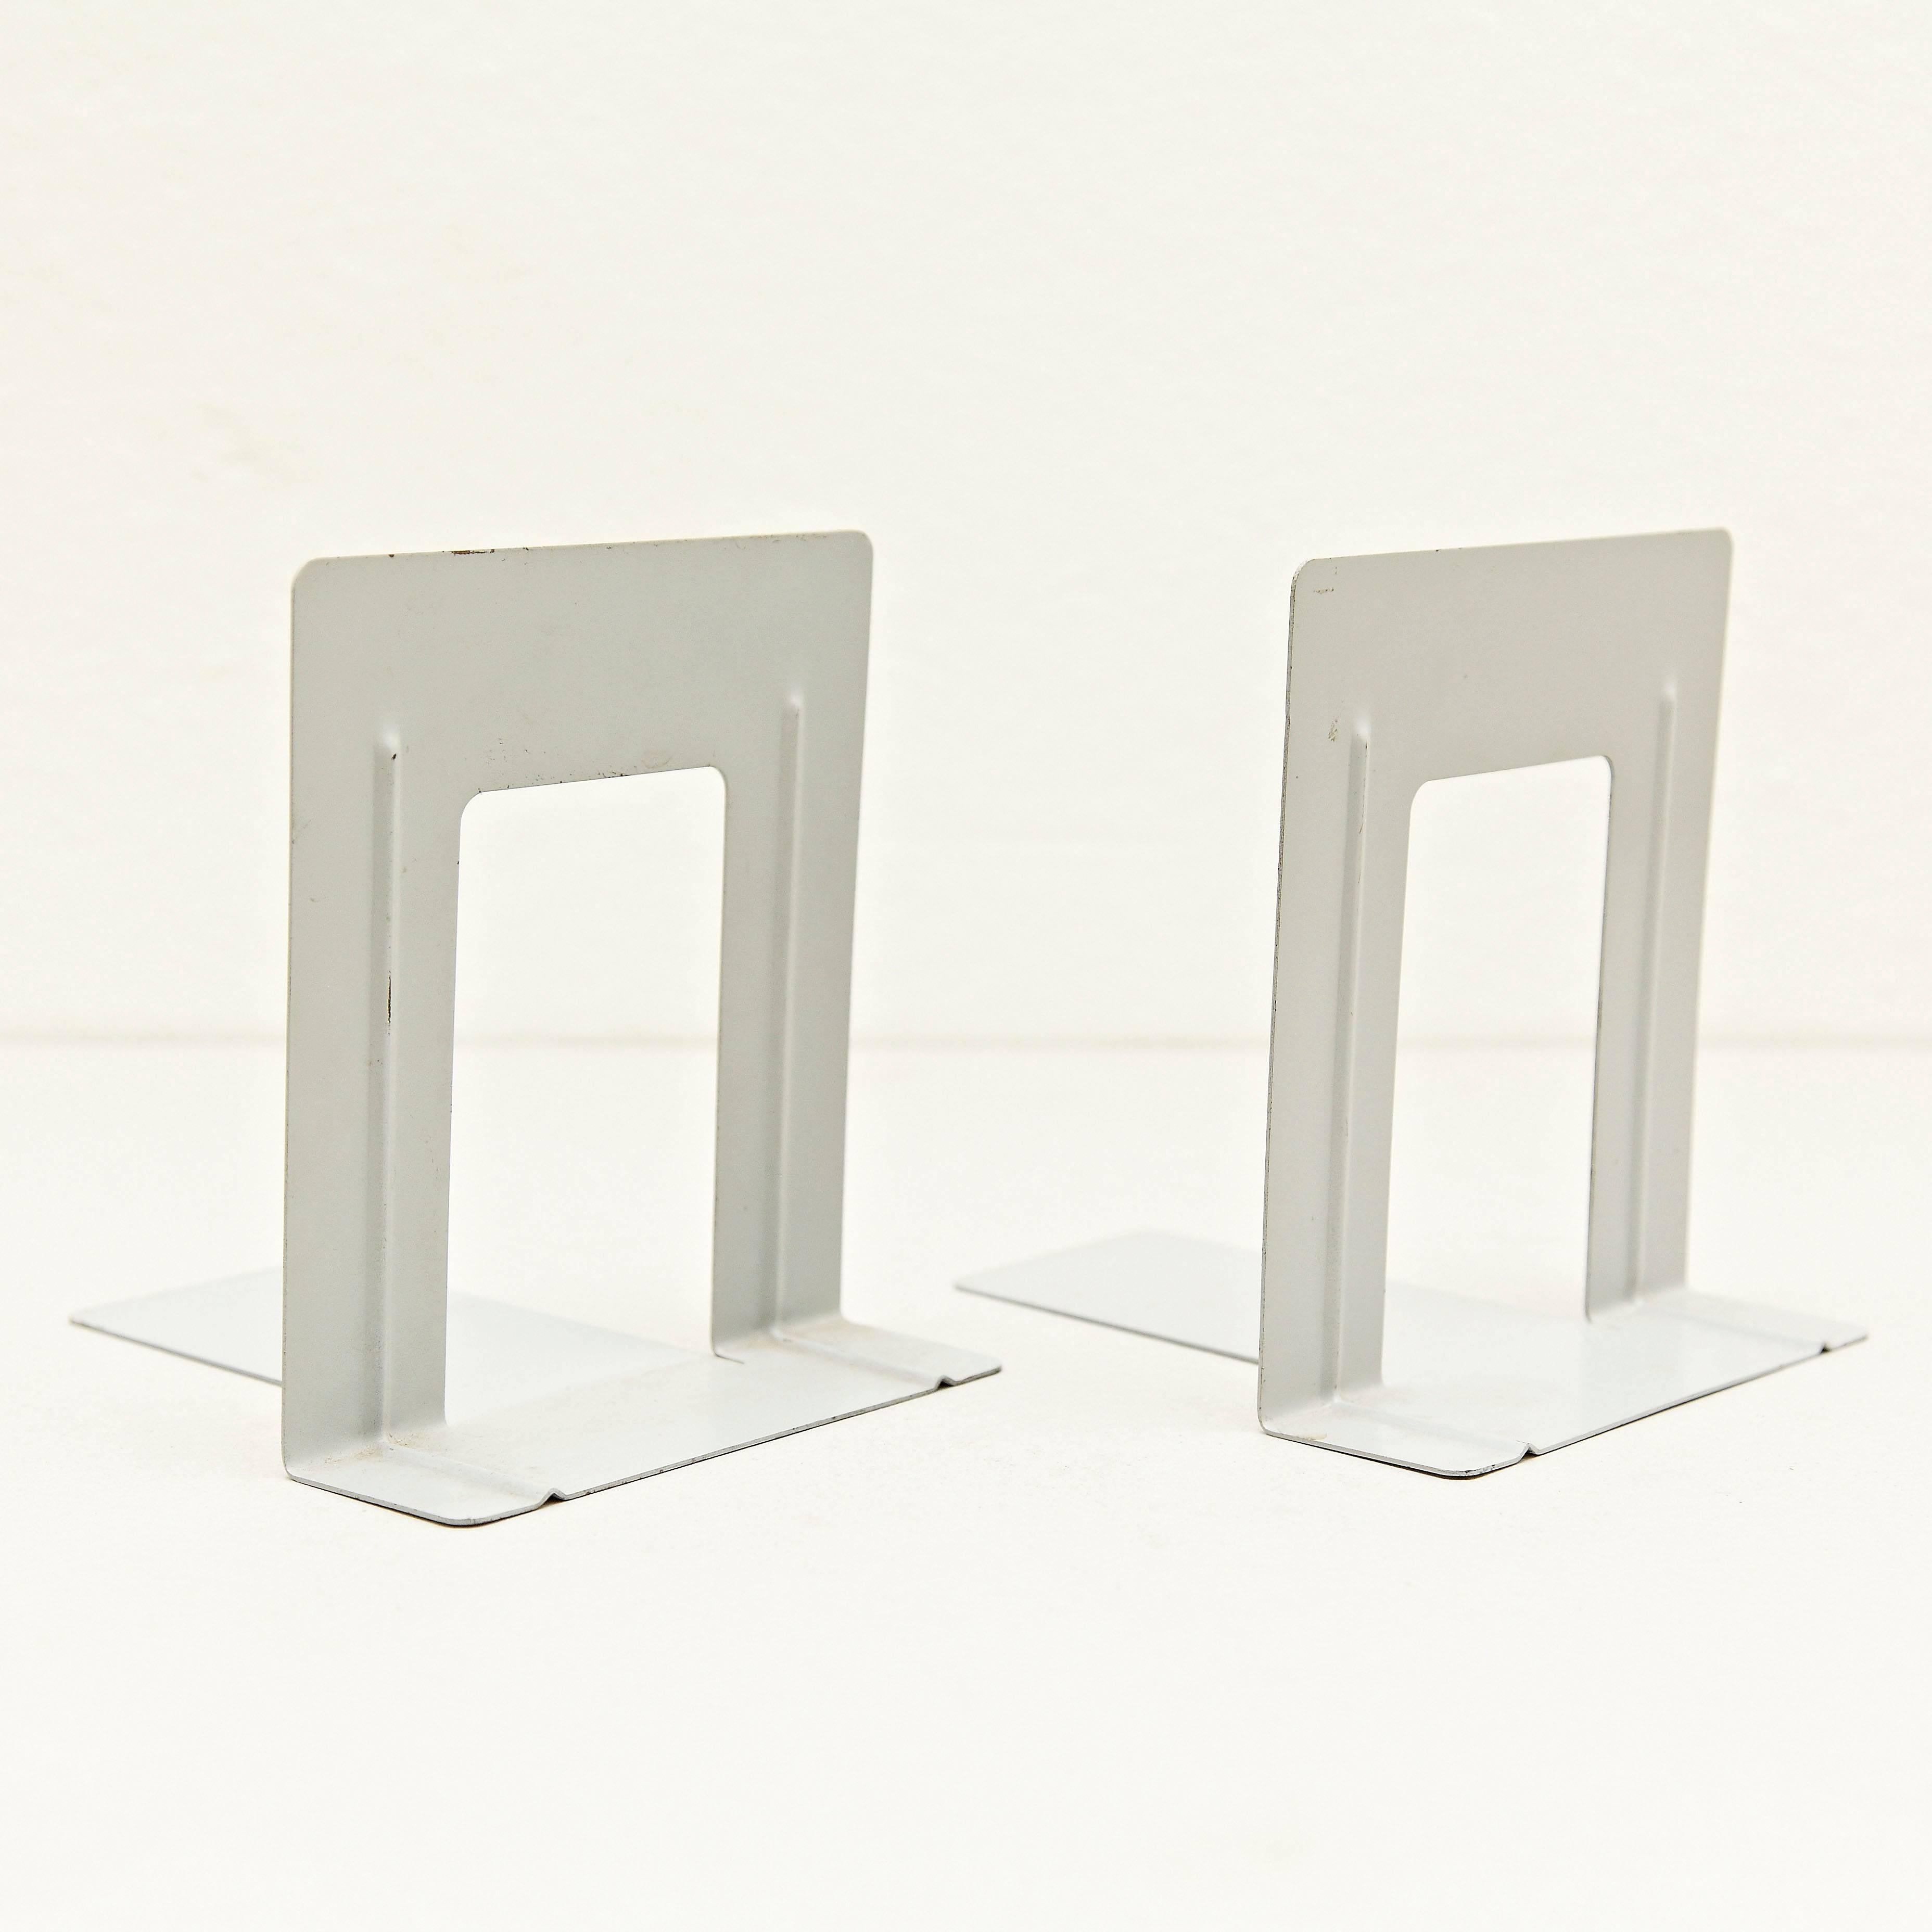 Bauhaus metal book holders, manufactured in Germany, circa 1940.

In great original condition, with minor wear consistent with age and use, preserving a beautiful patina.